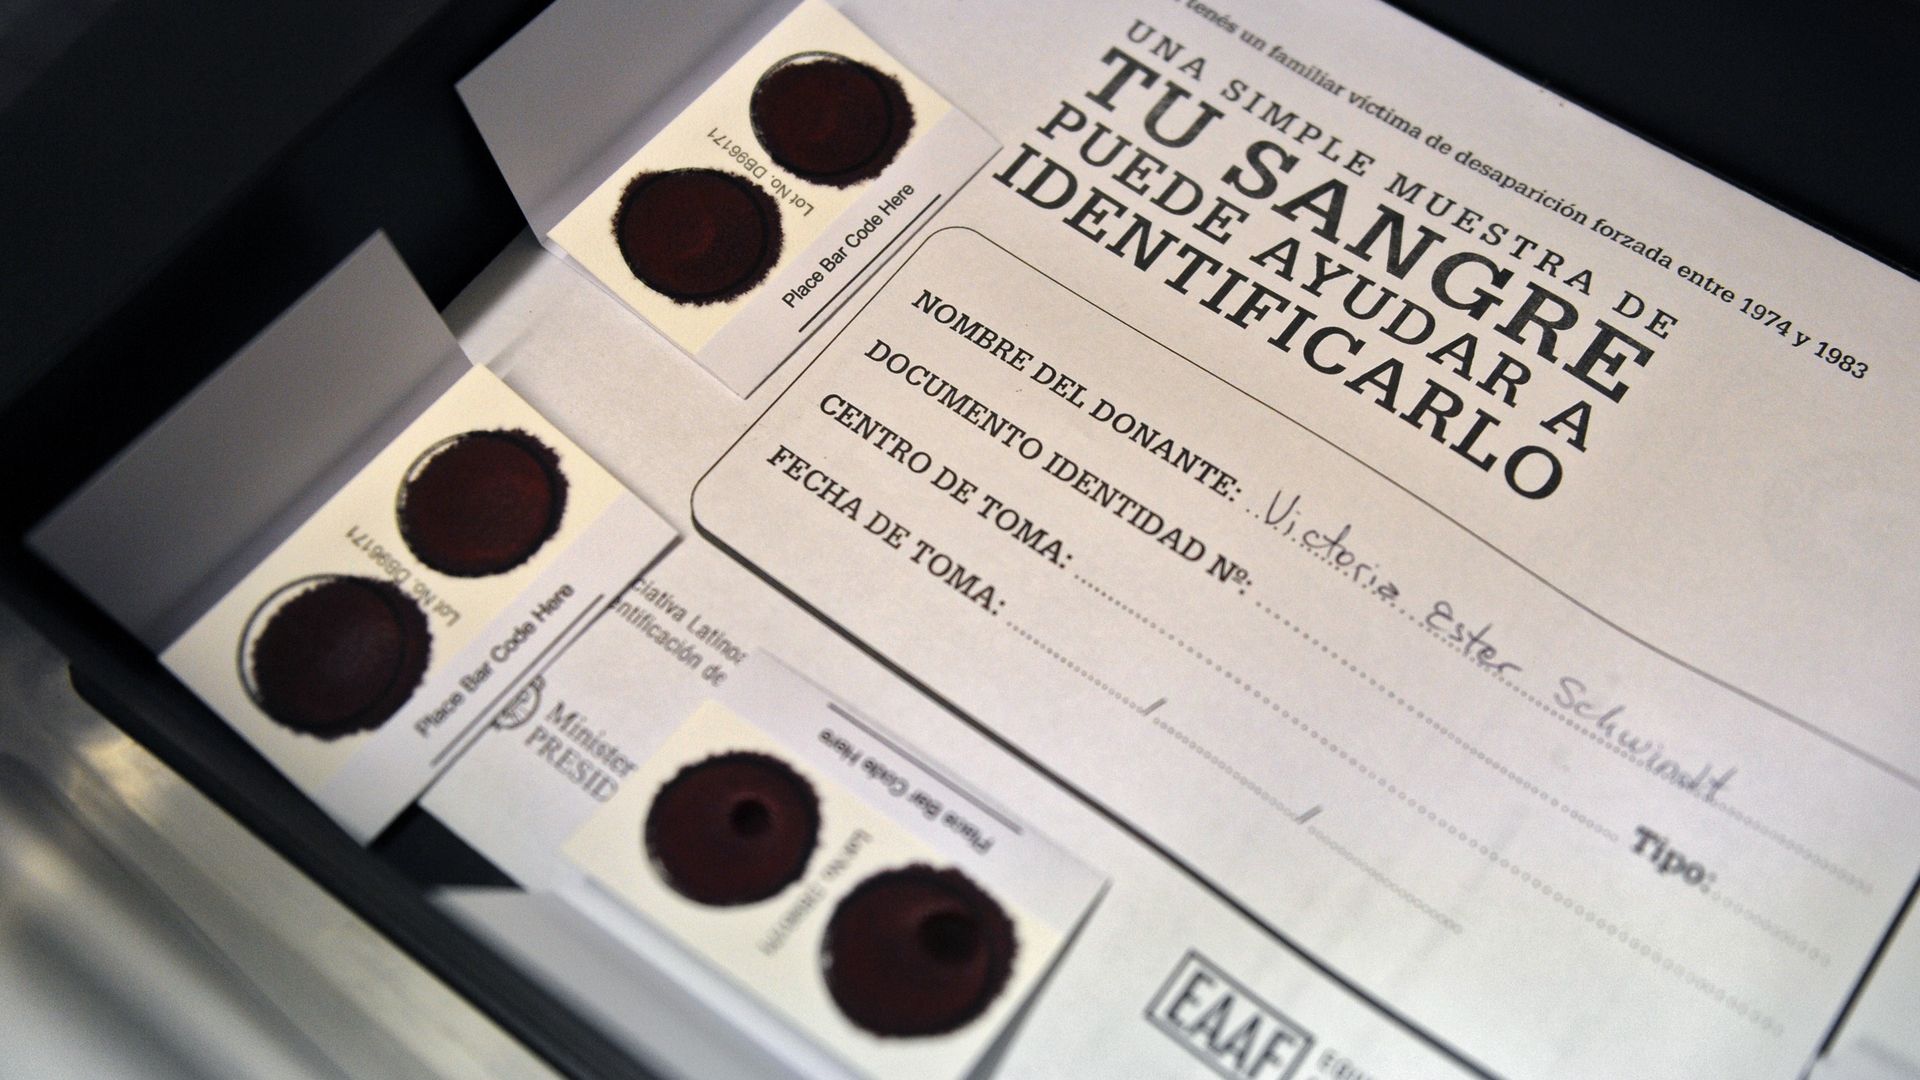 An form for a blood sample to help identify the remains of the formerly disappeared in Argentina.